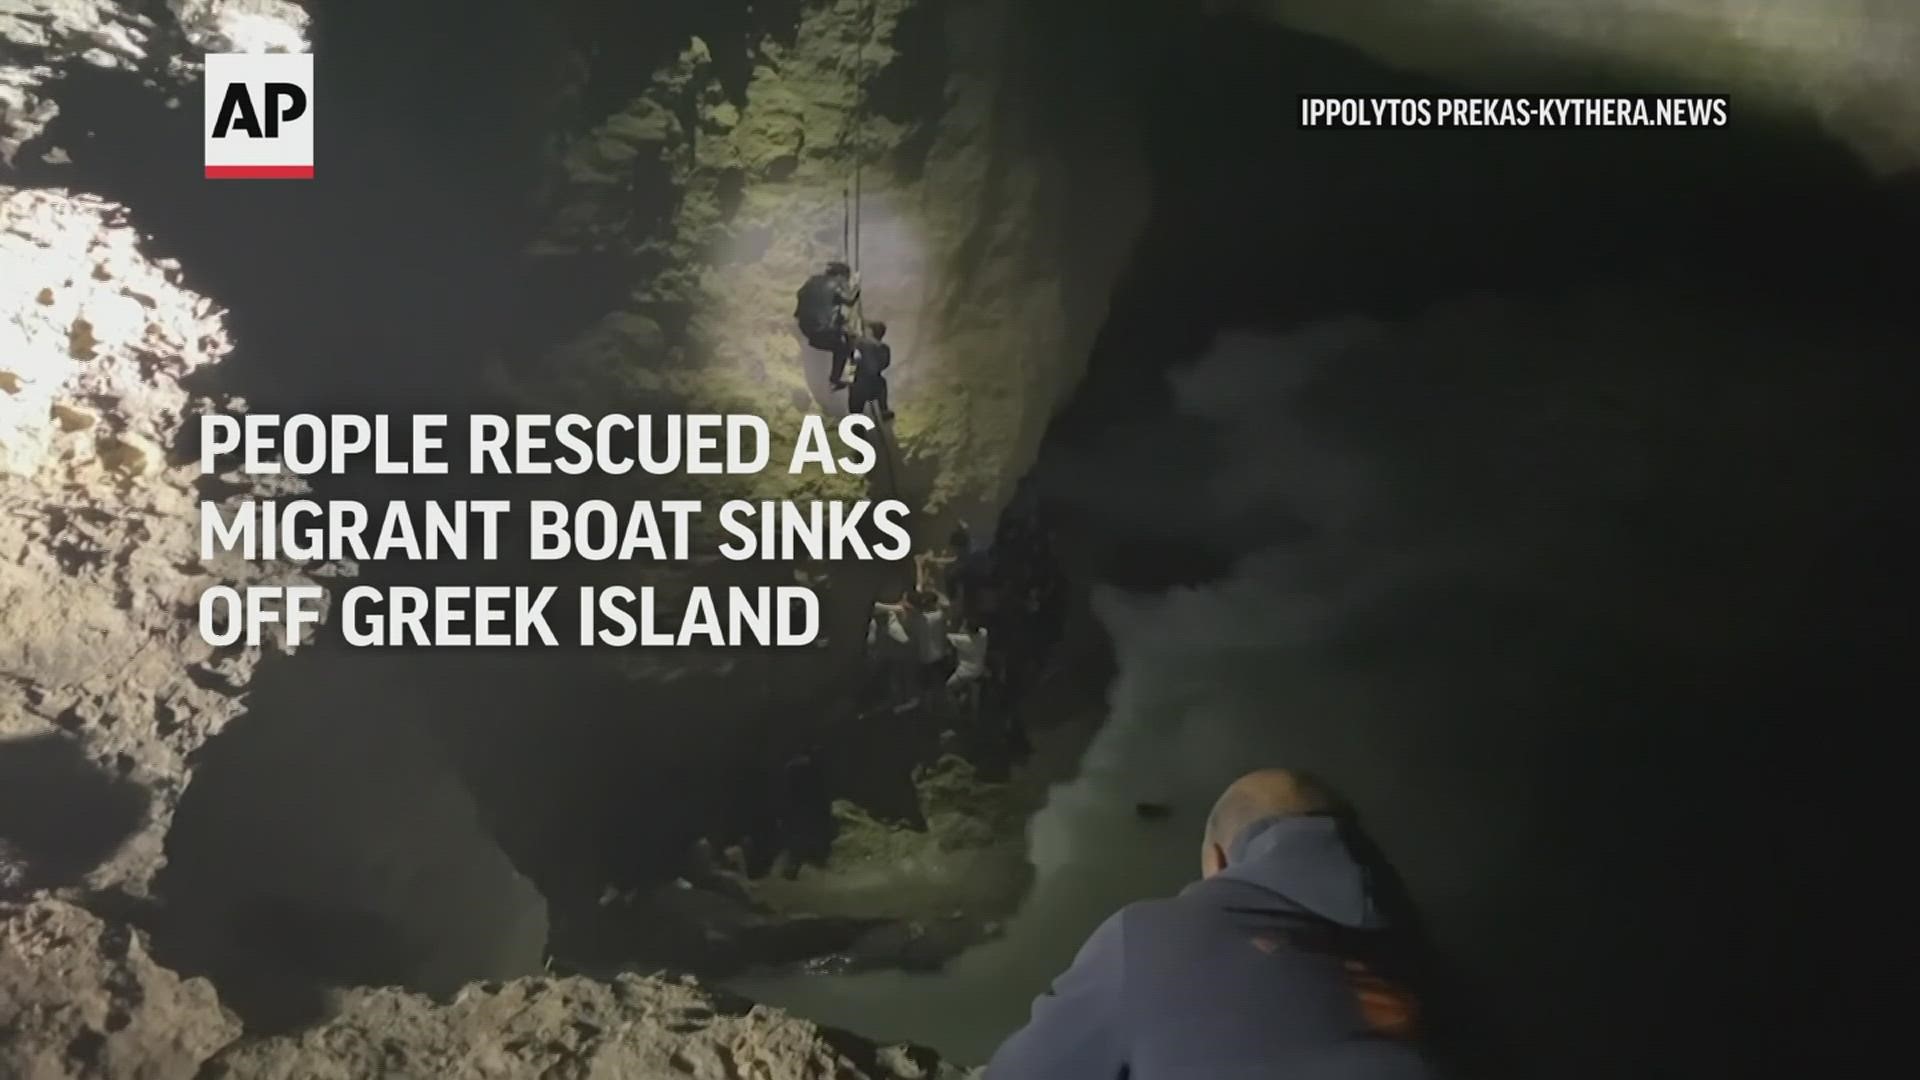 The vessels went down hundreds of miles apart, in one case prompting a dramatic overnight rescue effort to pull shipwrecked migrants up steep cliffs to safety.